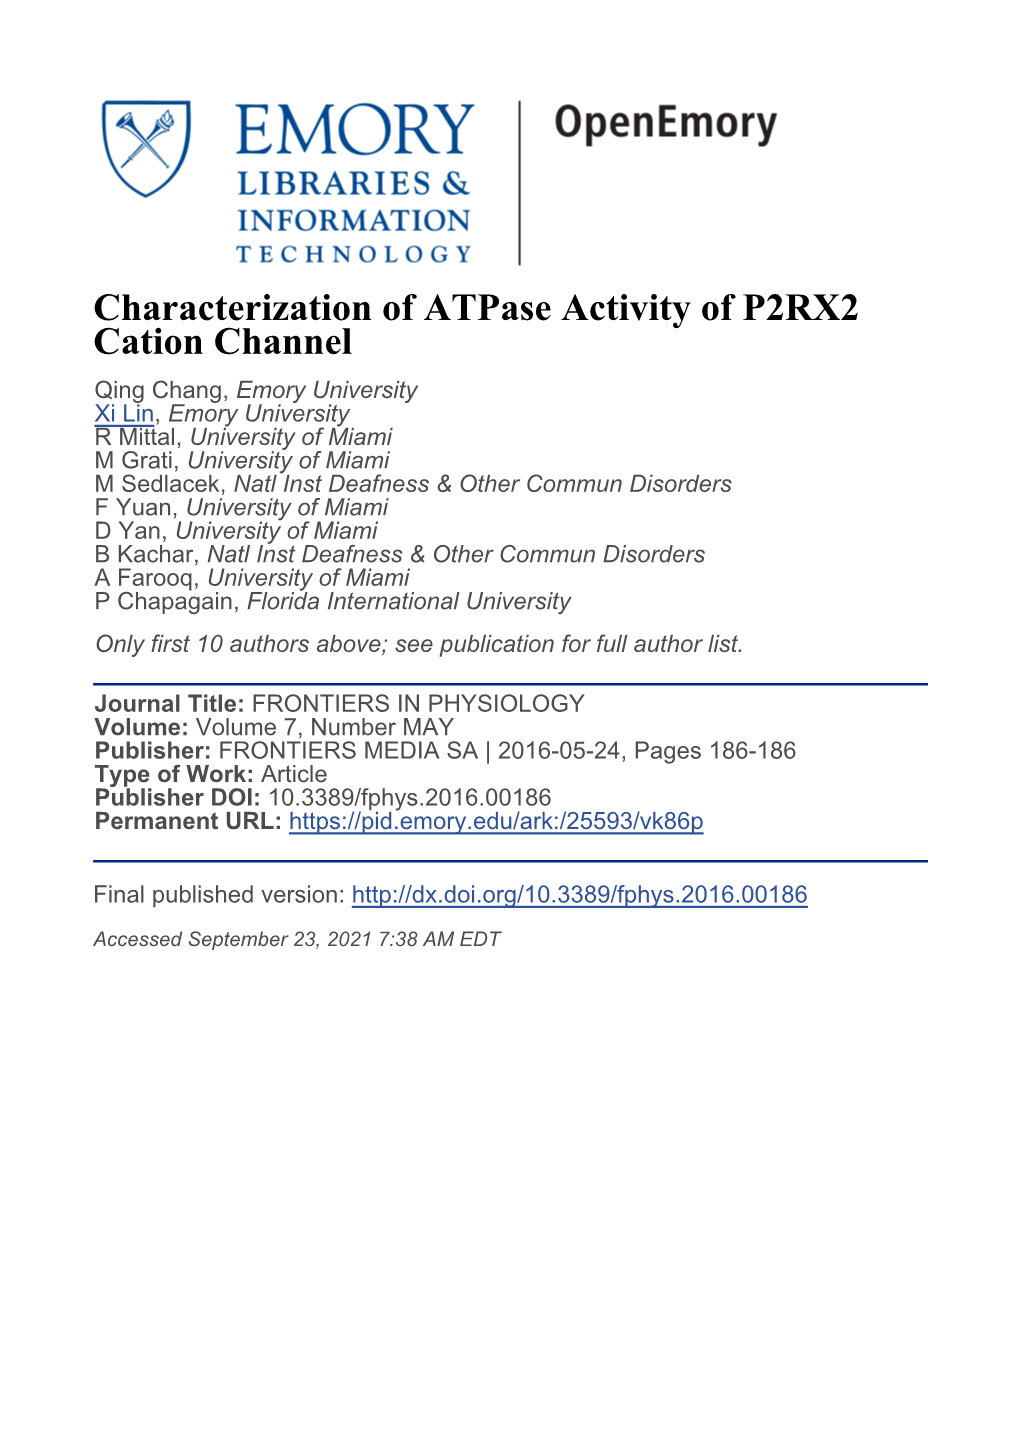 Characterization of Atpase Activity of P2RX2 Cation Channel